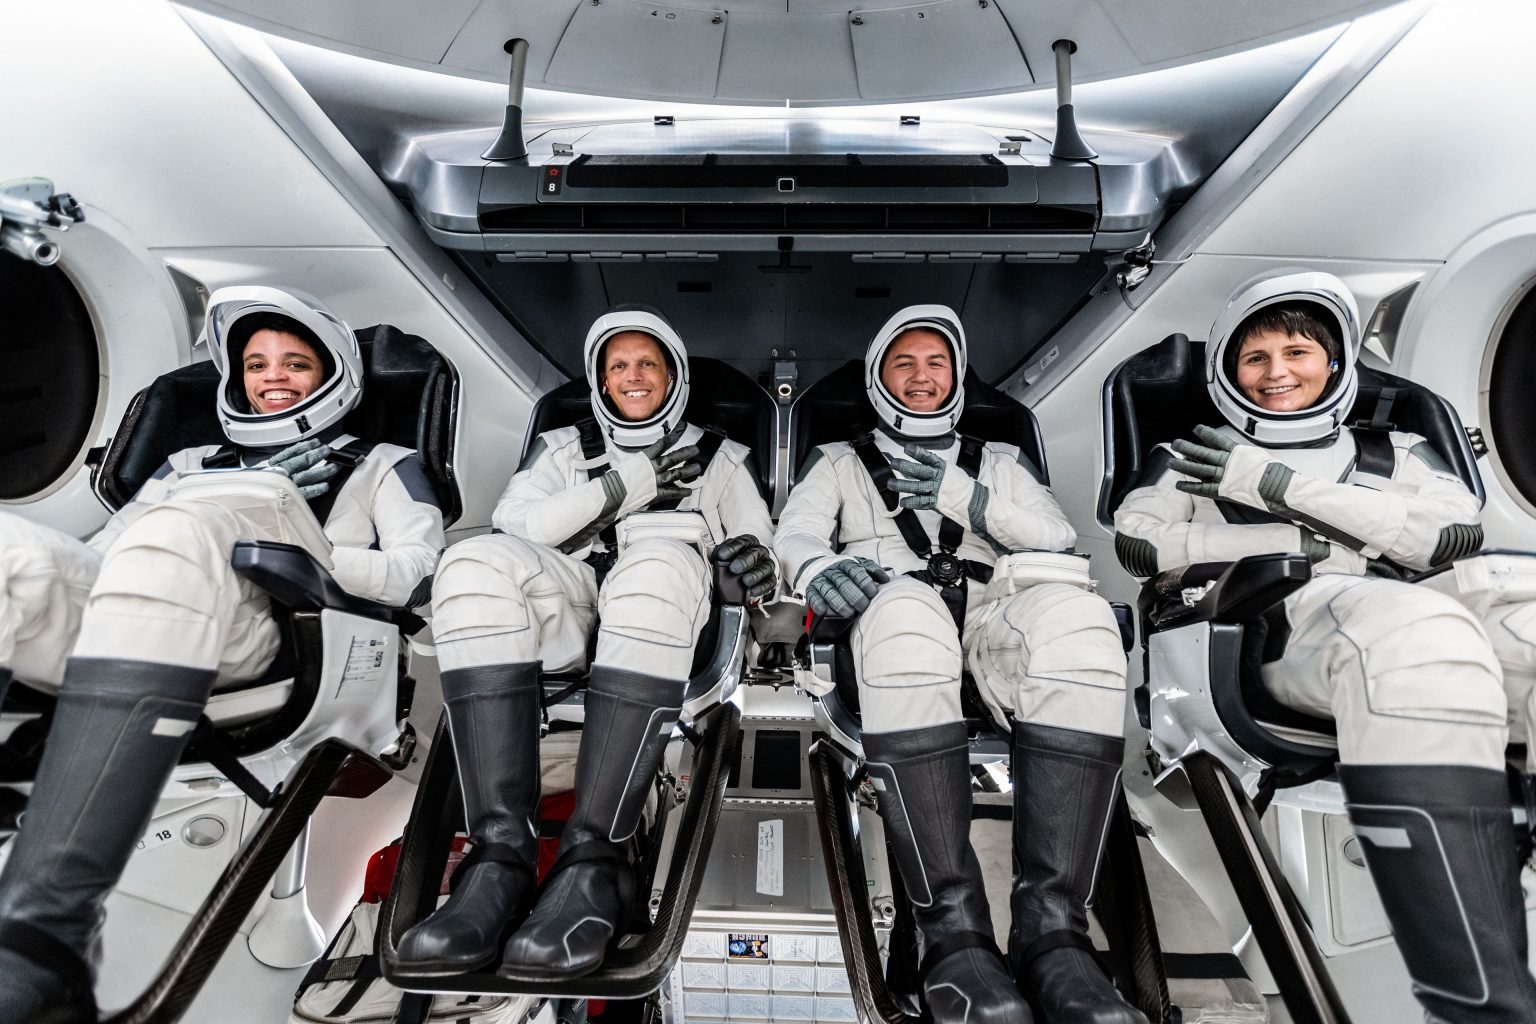 SpaceX Crew-4 Astronauts Go Over Training Ahead Of Launching To The Orbiting Laboratory Aboard Crew Dragon